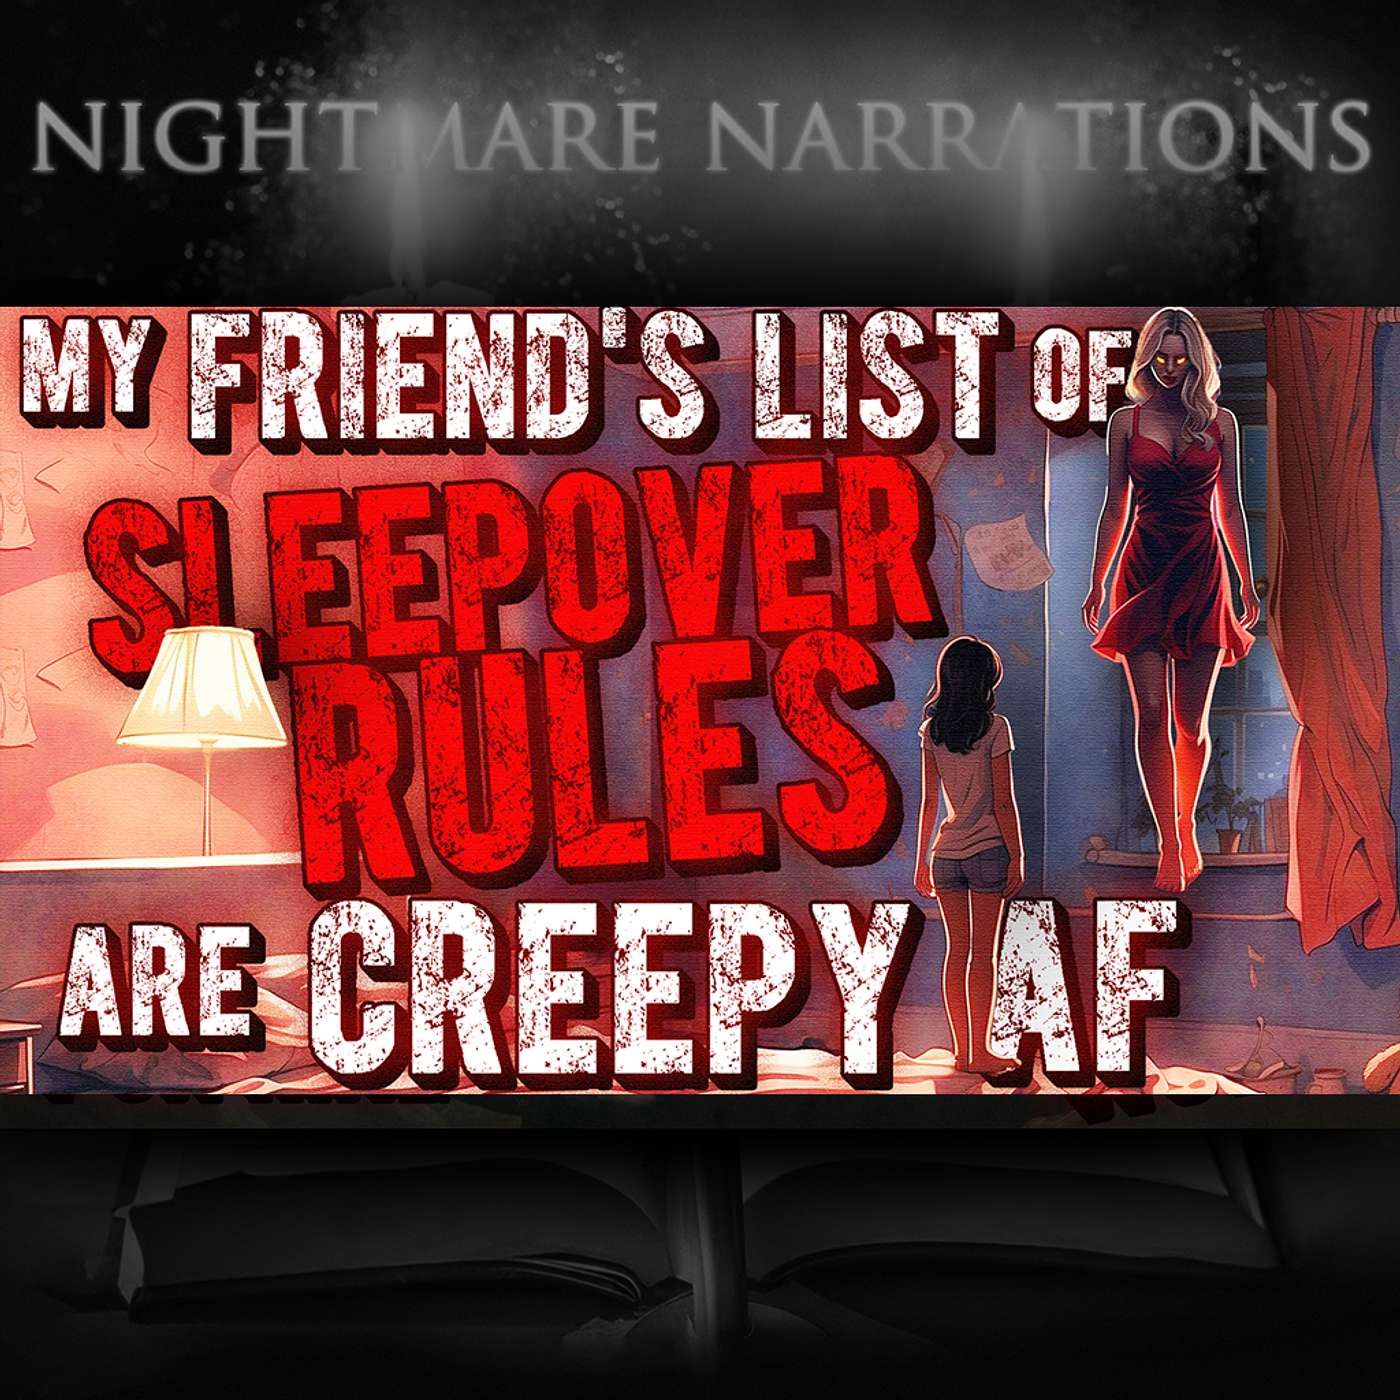 My Friend's List of Sleepover Rules are Creepy AF - Chilling Reddit Story - Nightmare Narrations